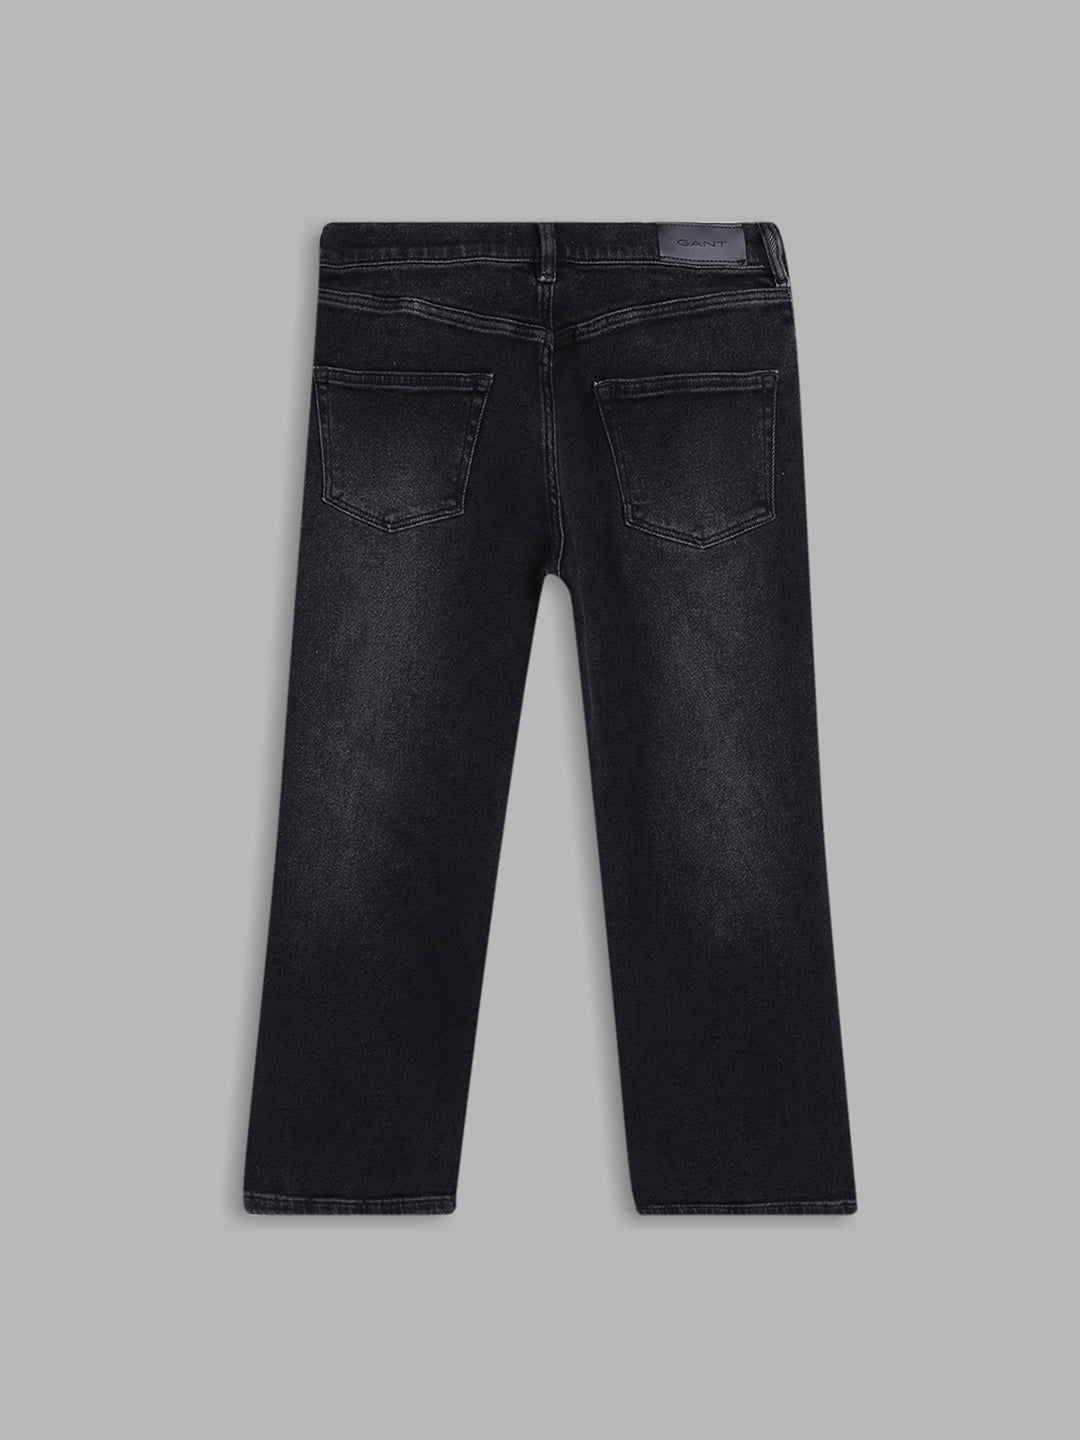 Gant Boys Black Relaxed Fit Light Fade Cotton Jeans